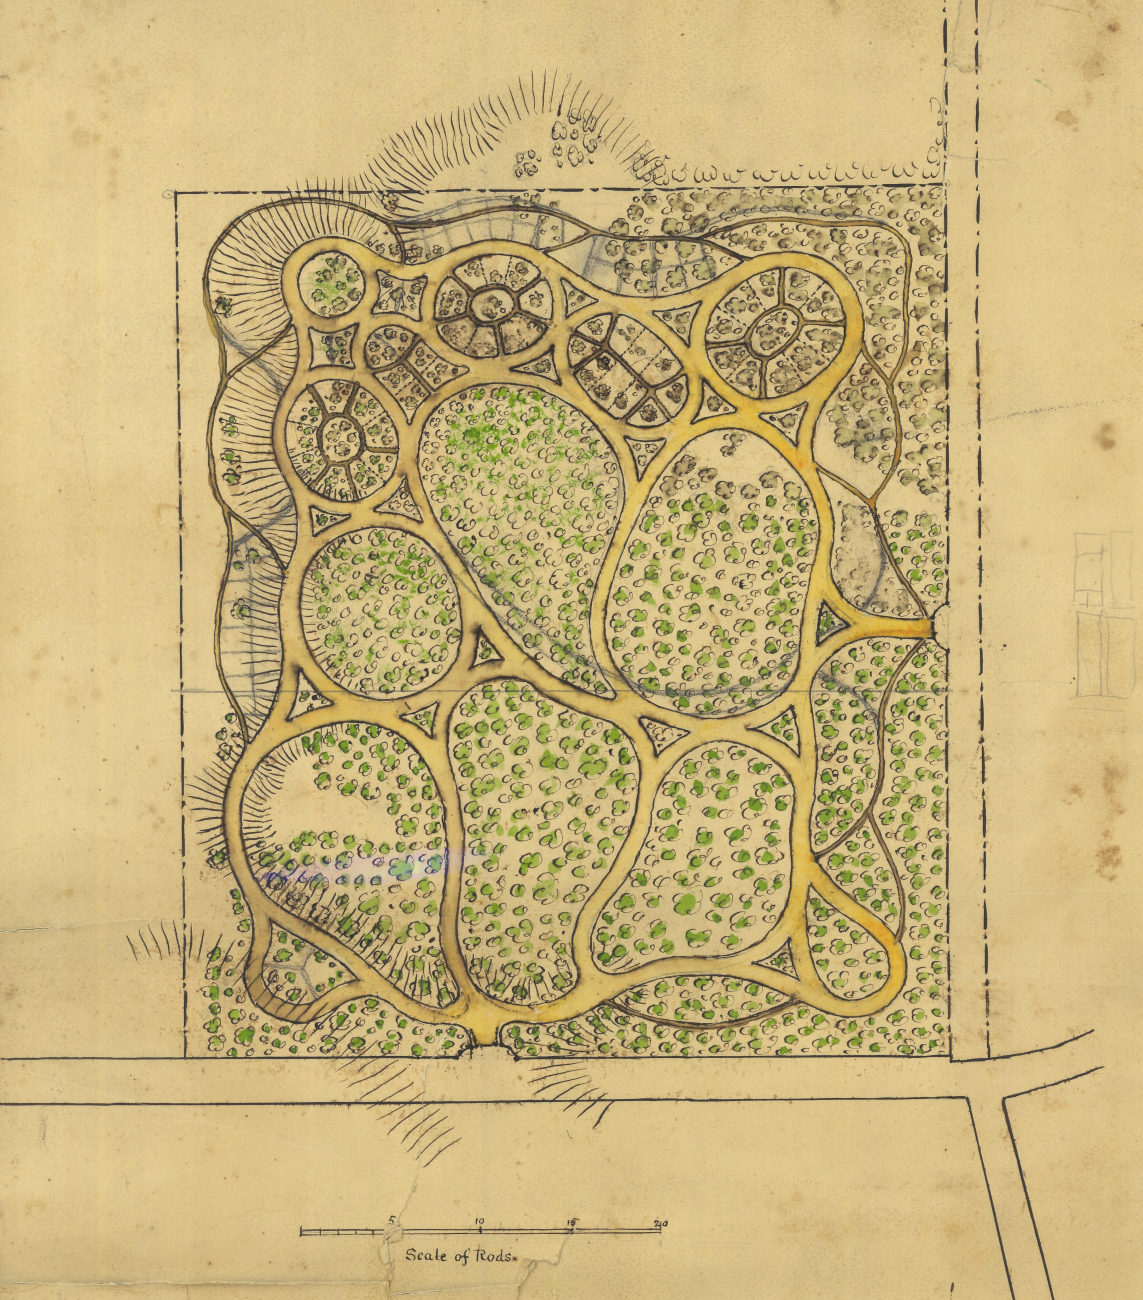 A park designed by Henry Whiting perhaps as an example oftopographical drawing